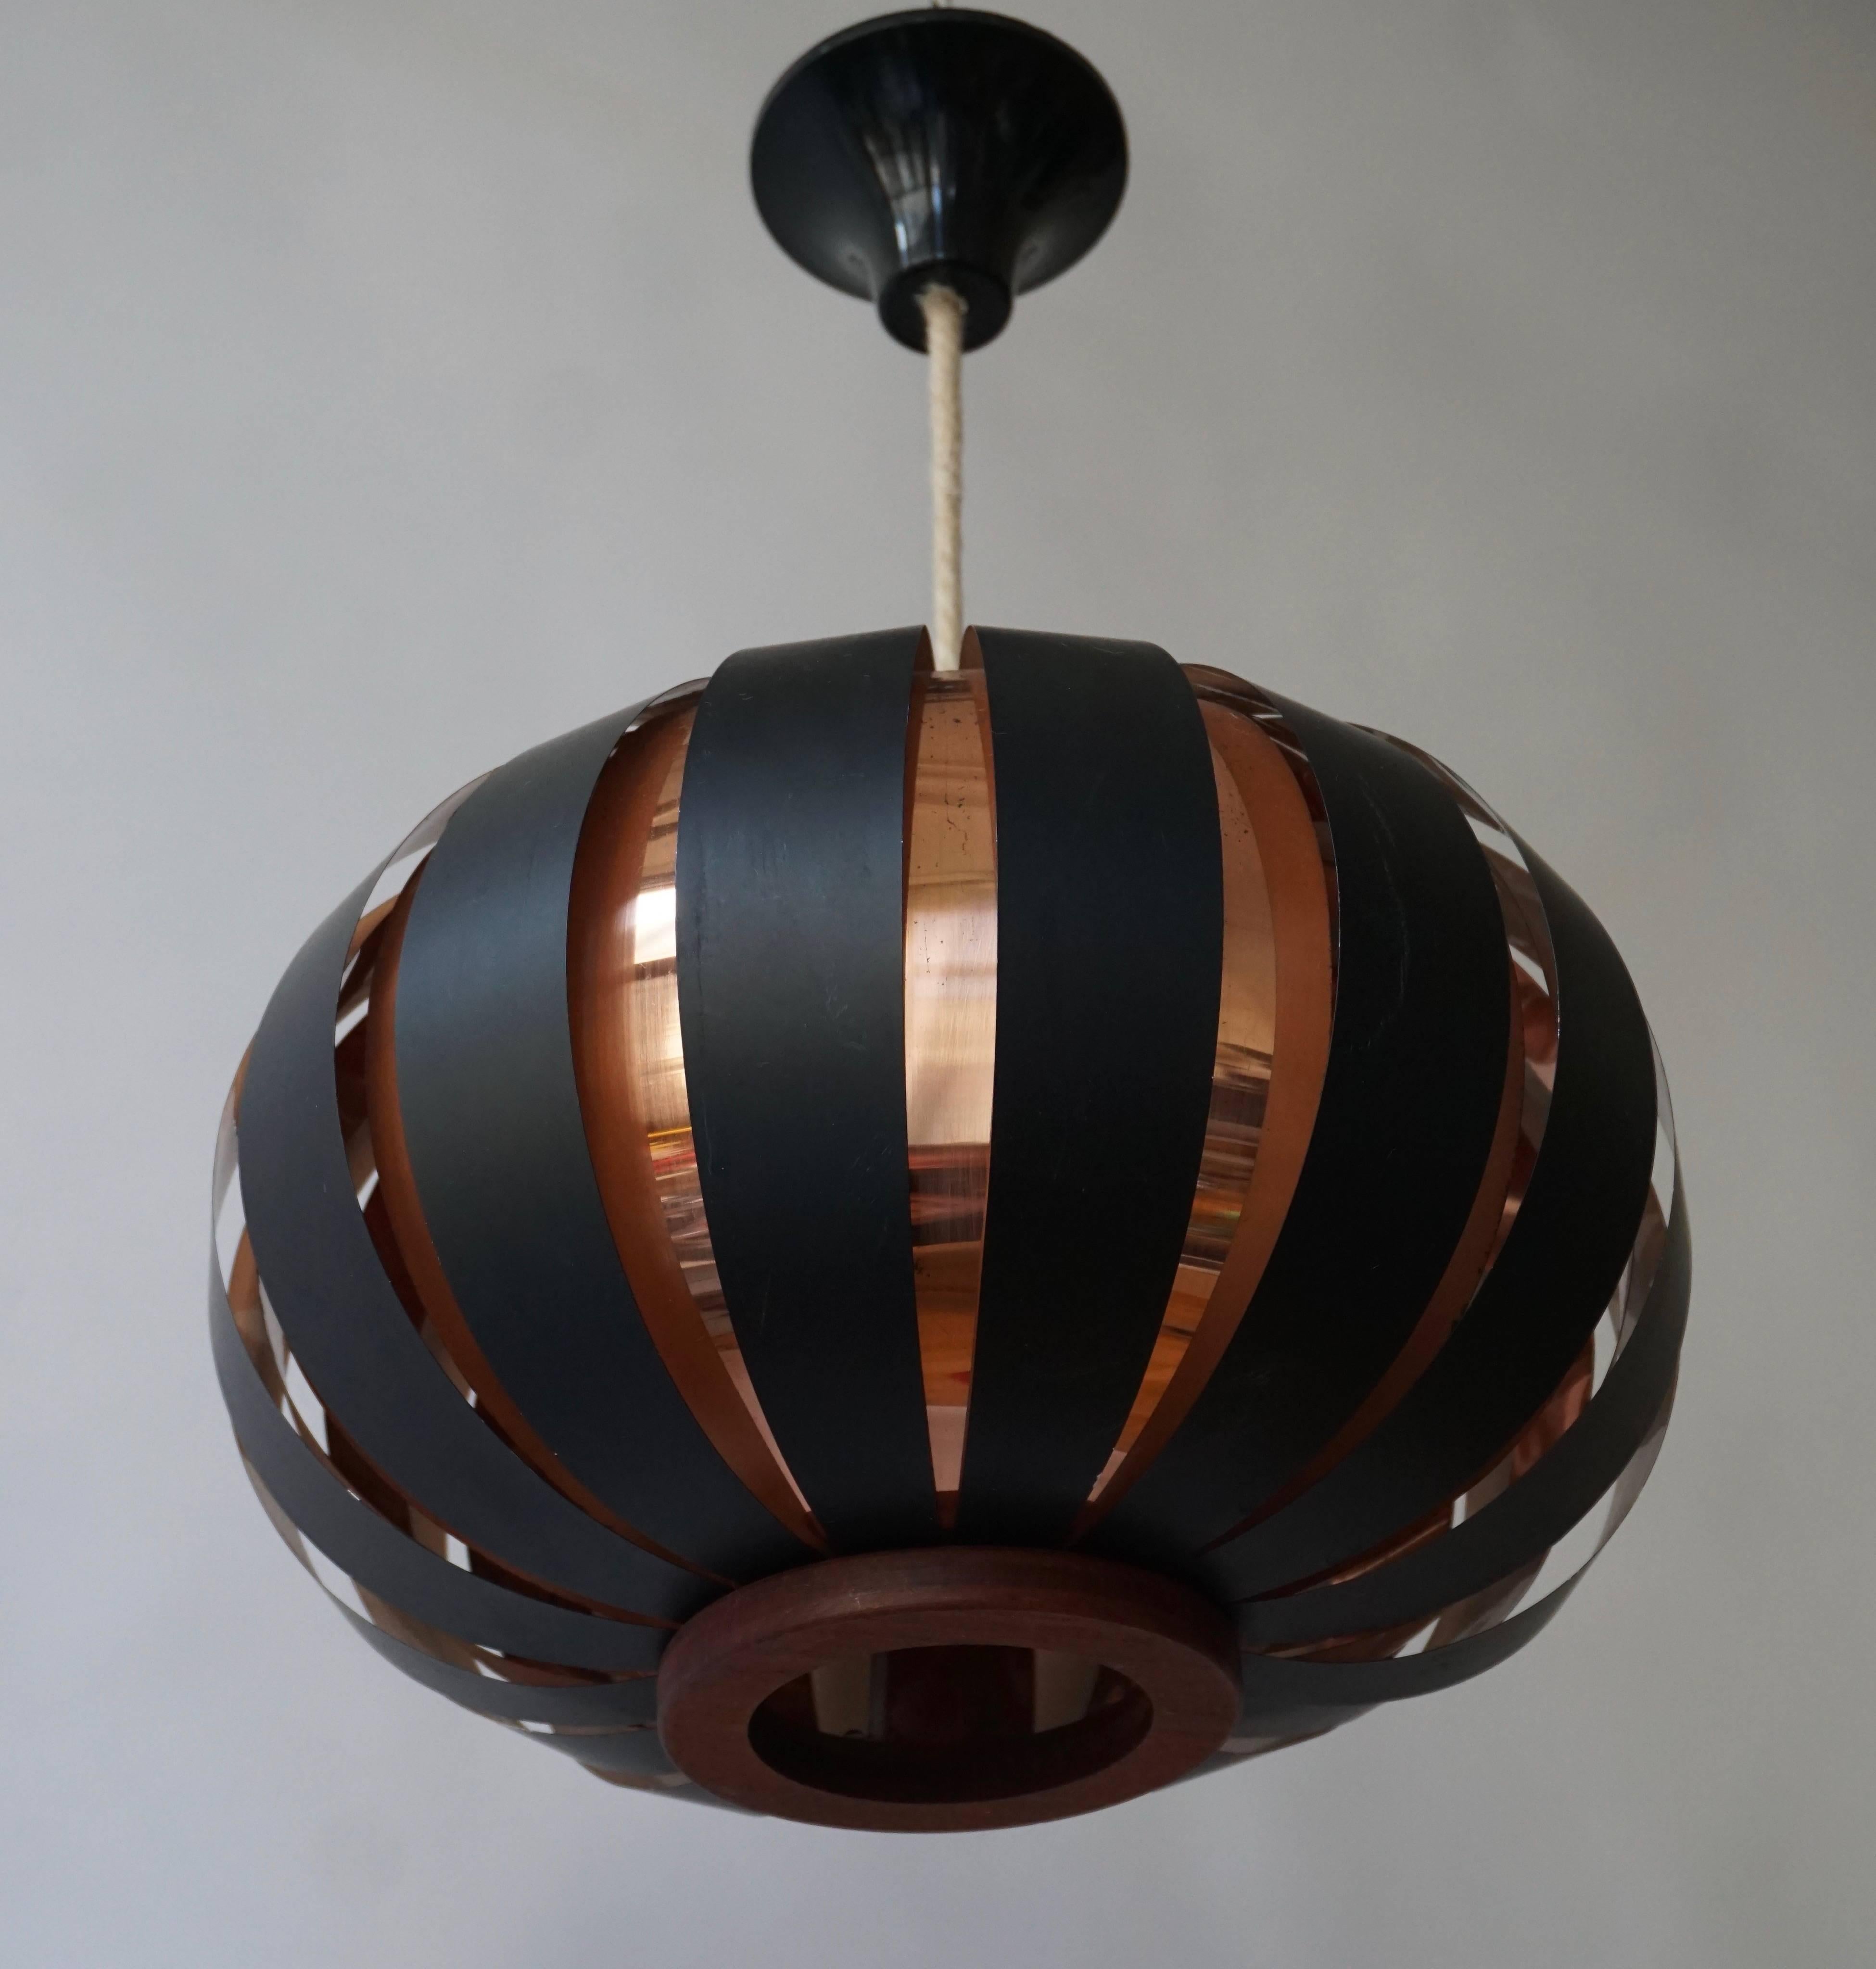 This vintage, modernist light fixture is crafted in copper.
Measures: Diameter 35 cm.
Height fixture 24 cm.
Total height 55 cm.
               